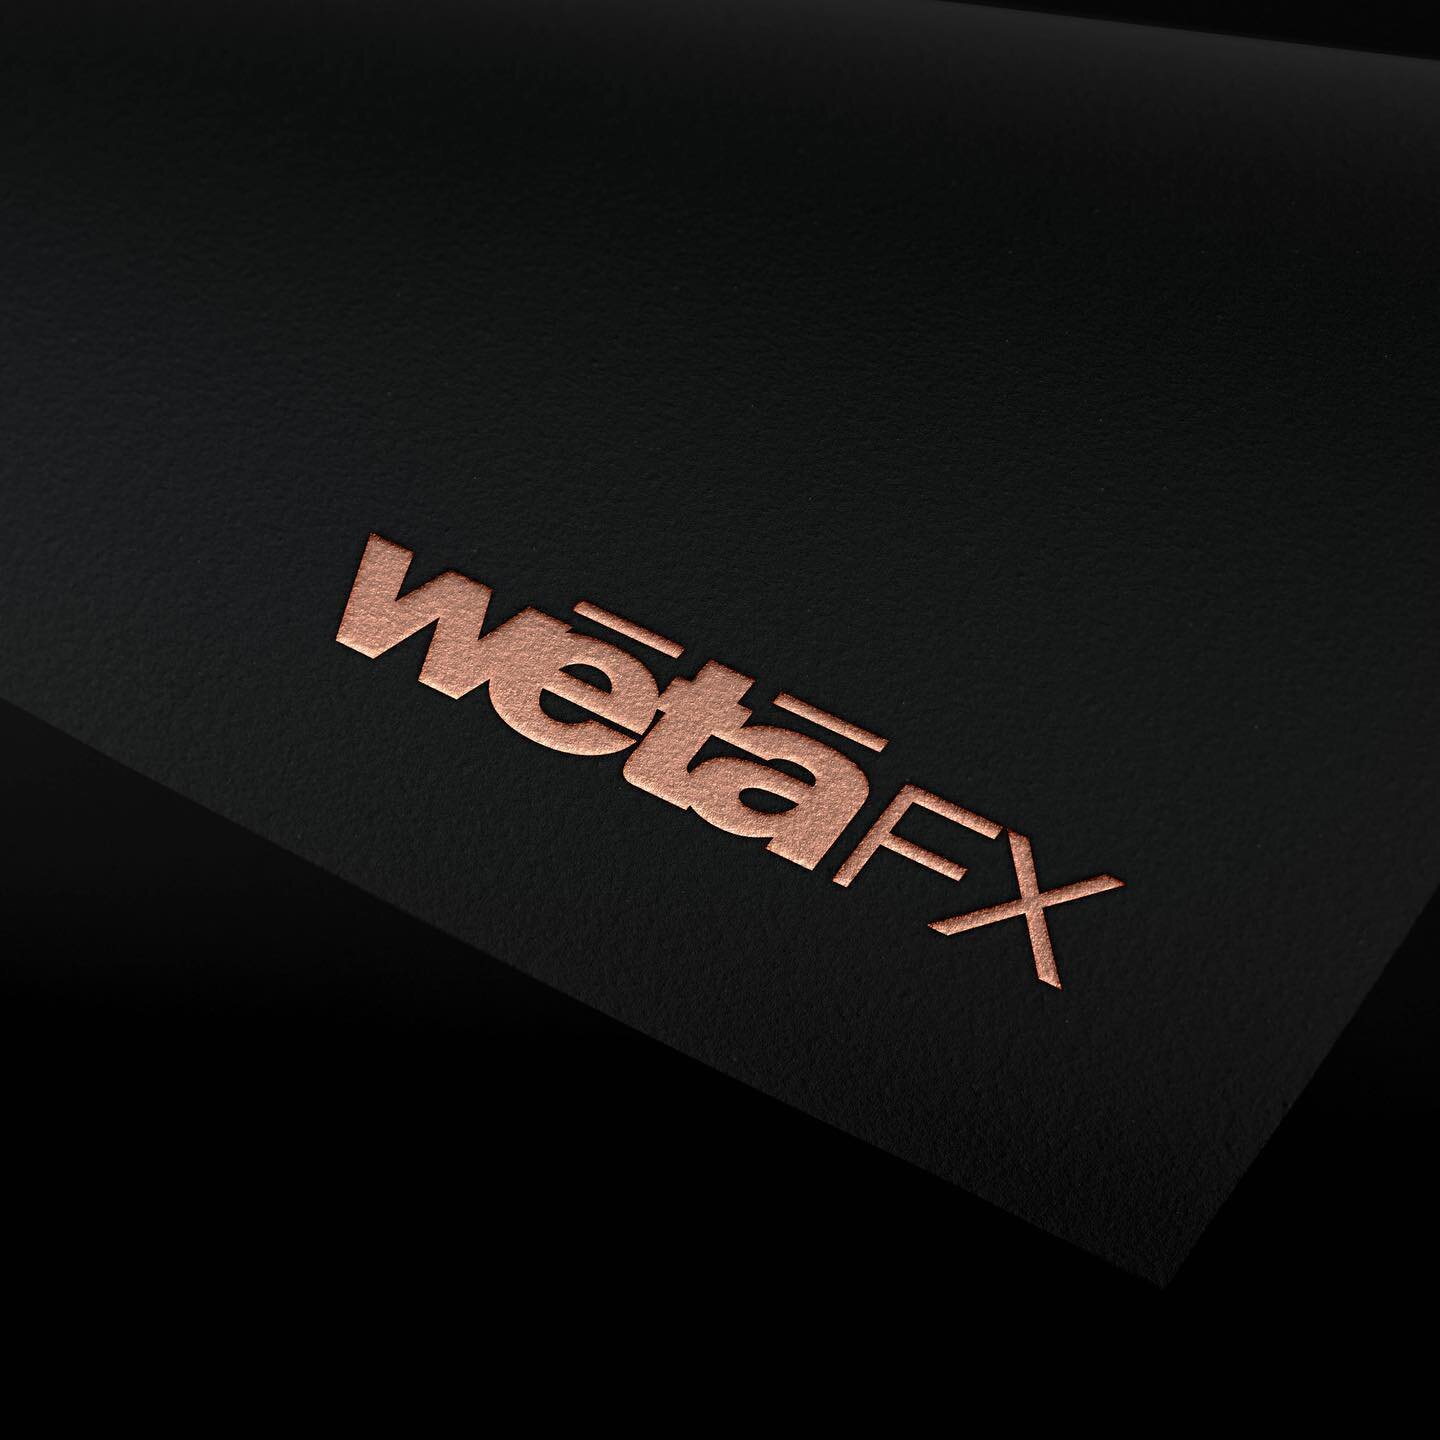 Wētā FX is renowned for its creative and groundbreaking visual effects and animation in the digital industry. The team consists of ambitious artists and innovators who consistently deliver world-class, award-winning work. 

Since 2015, we have had th